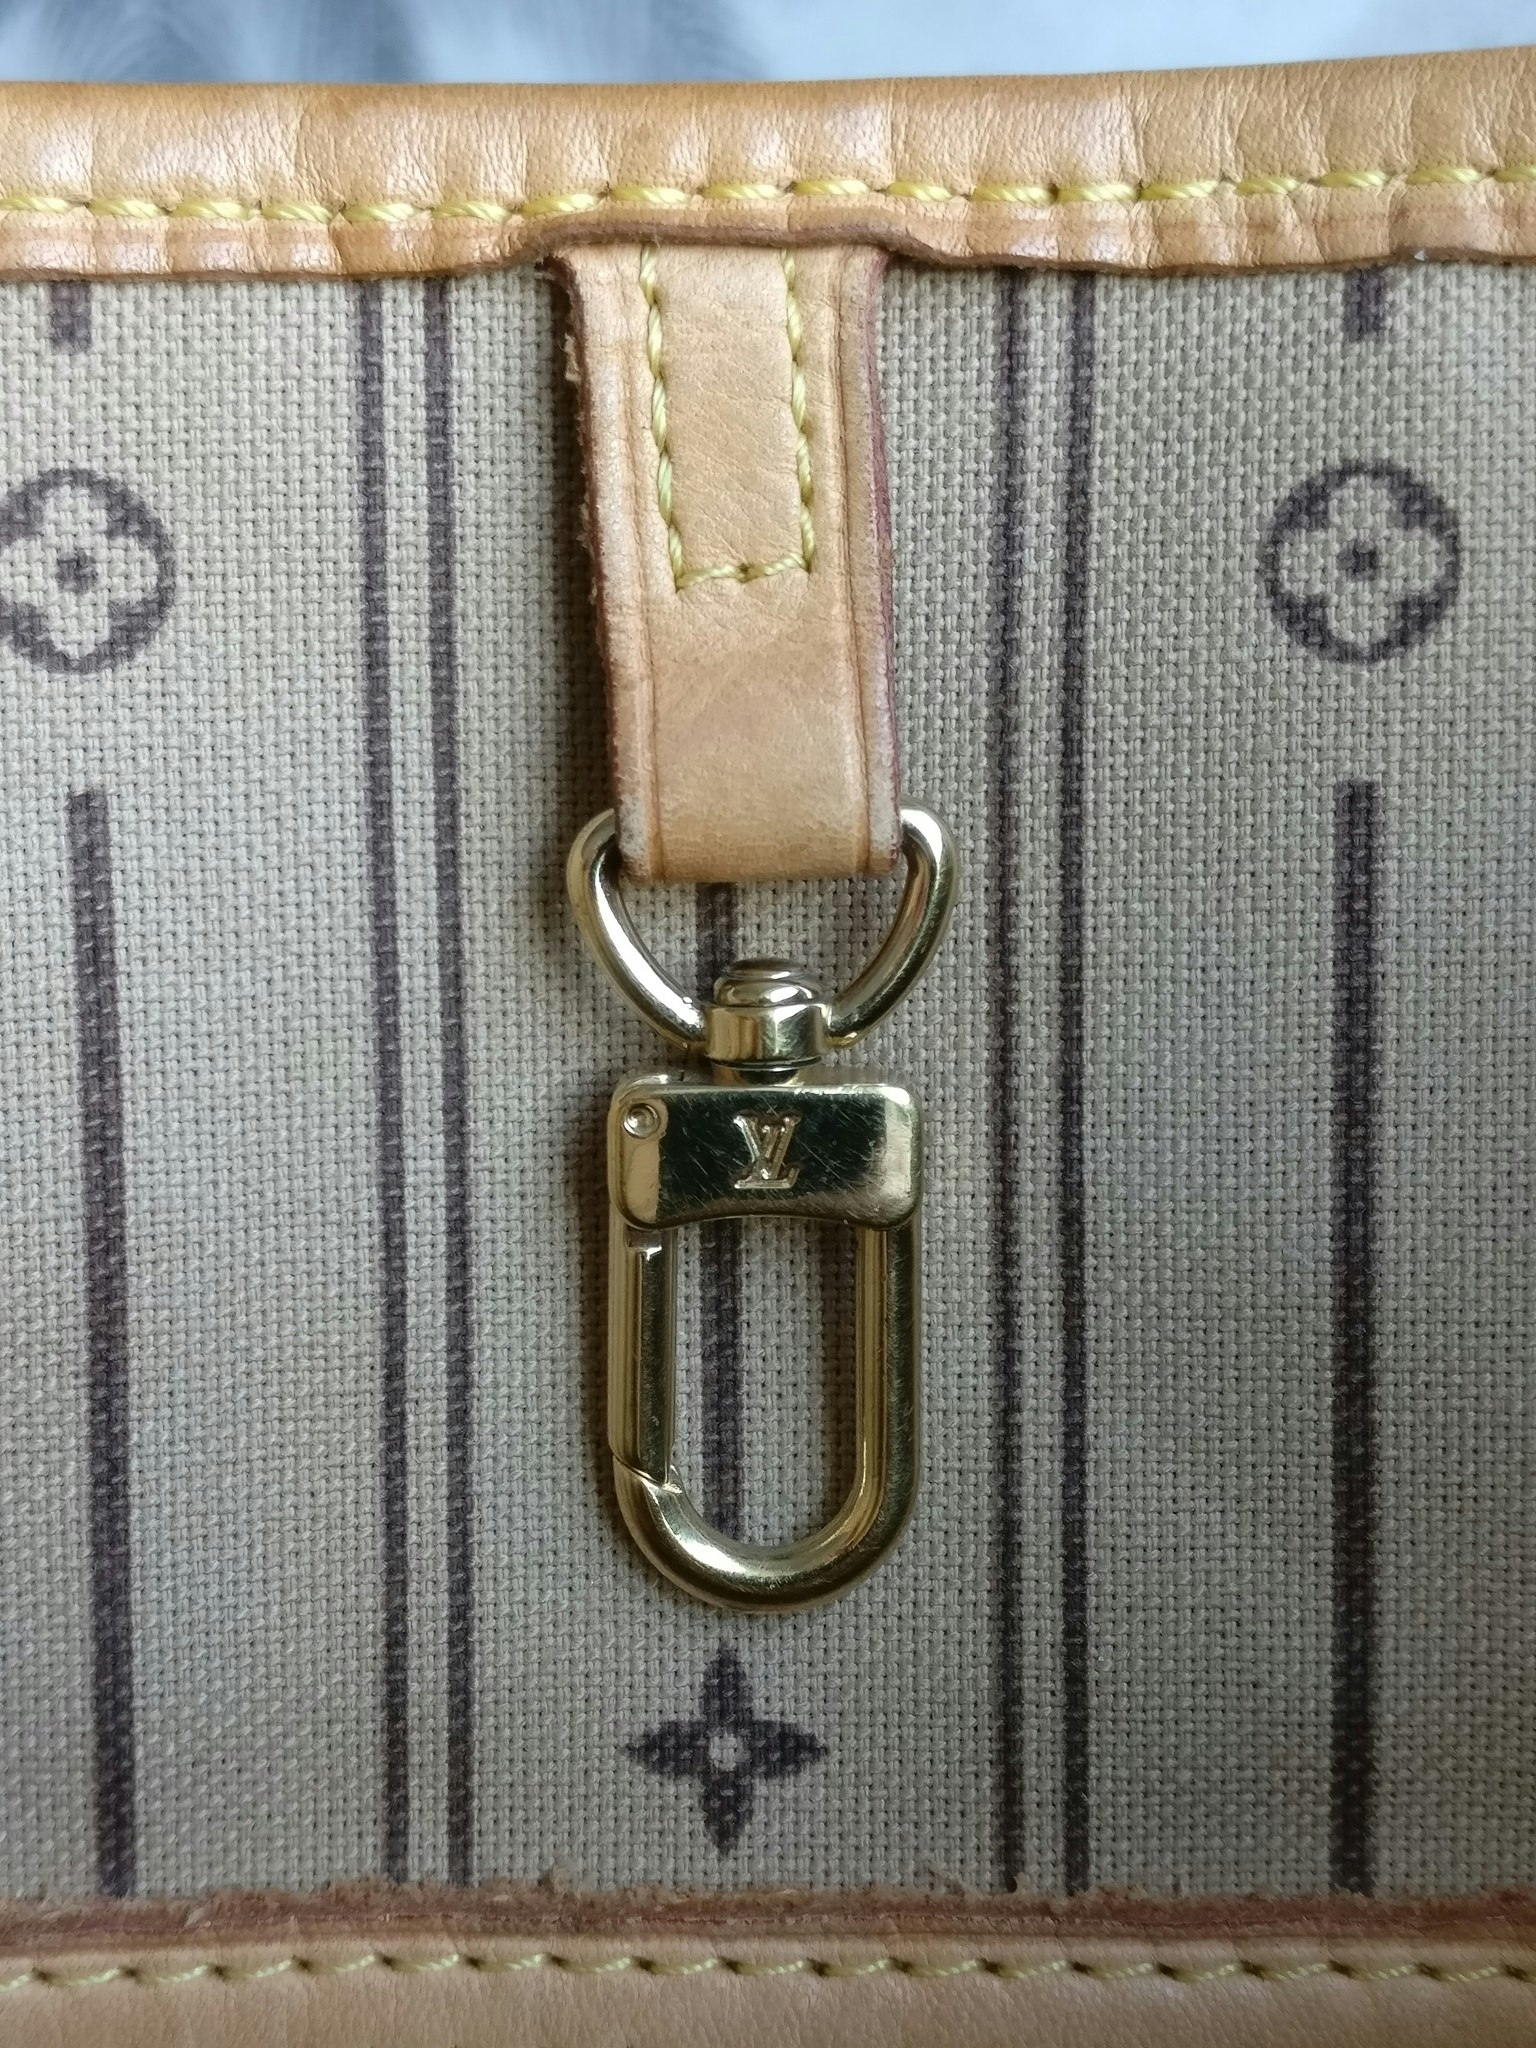 Louis Vuitton Neverfull MM Bag for Sale in Bay Shore, NY - OfferUp